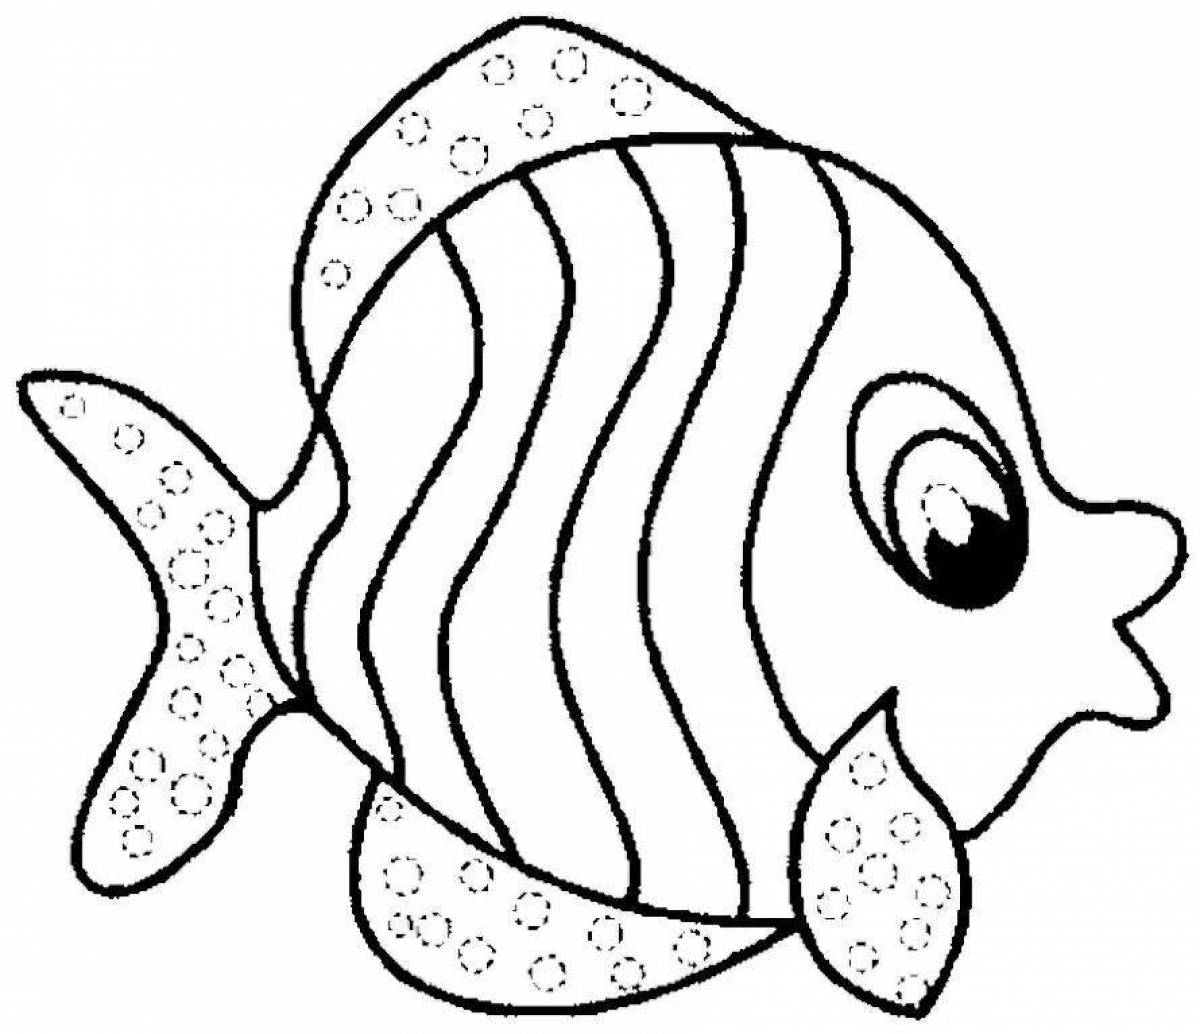 Fun fish coloring book for 3-4 year olds